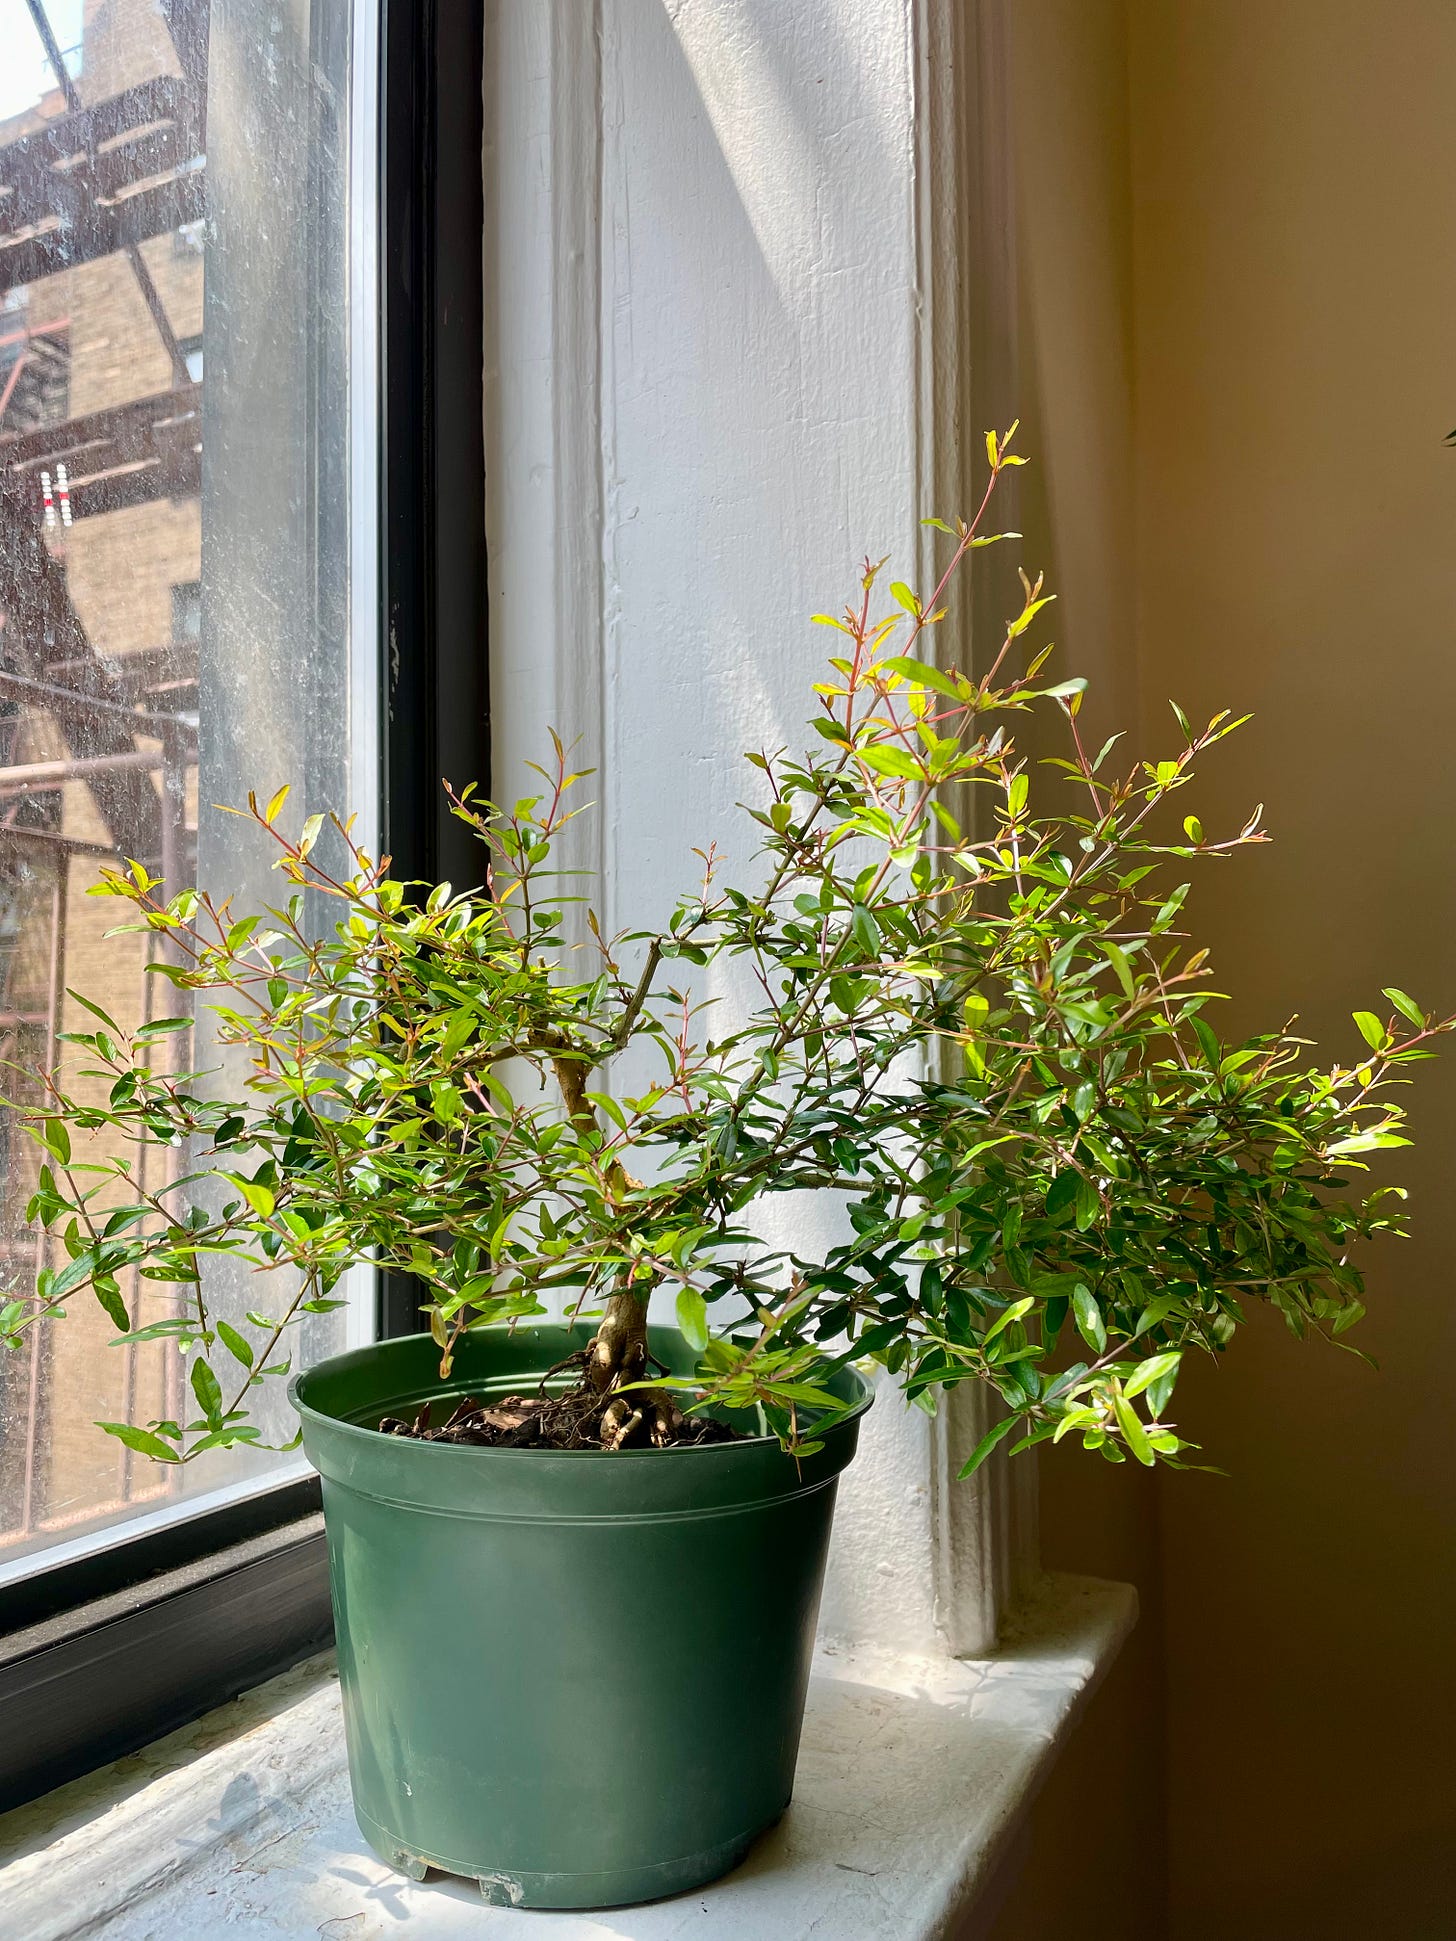 ID: Photo of a very bushy pomegranate tree on my windowsill. All the photos here are going to be of the same tree, so I'll keep the alt text brief.